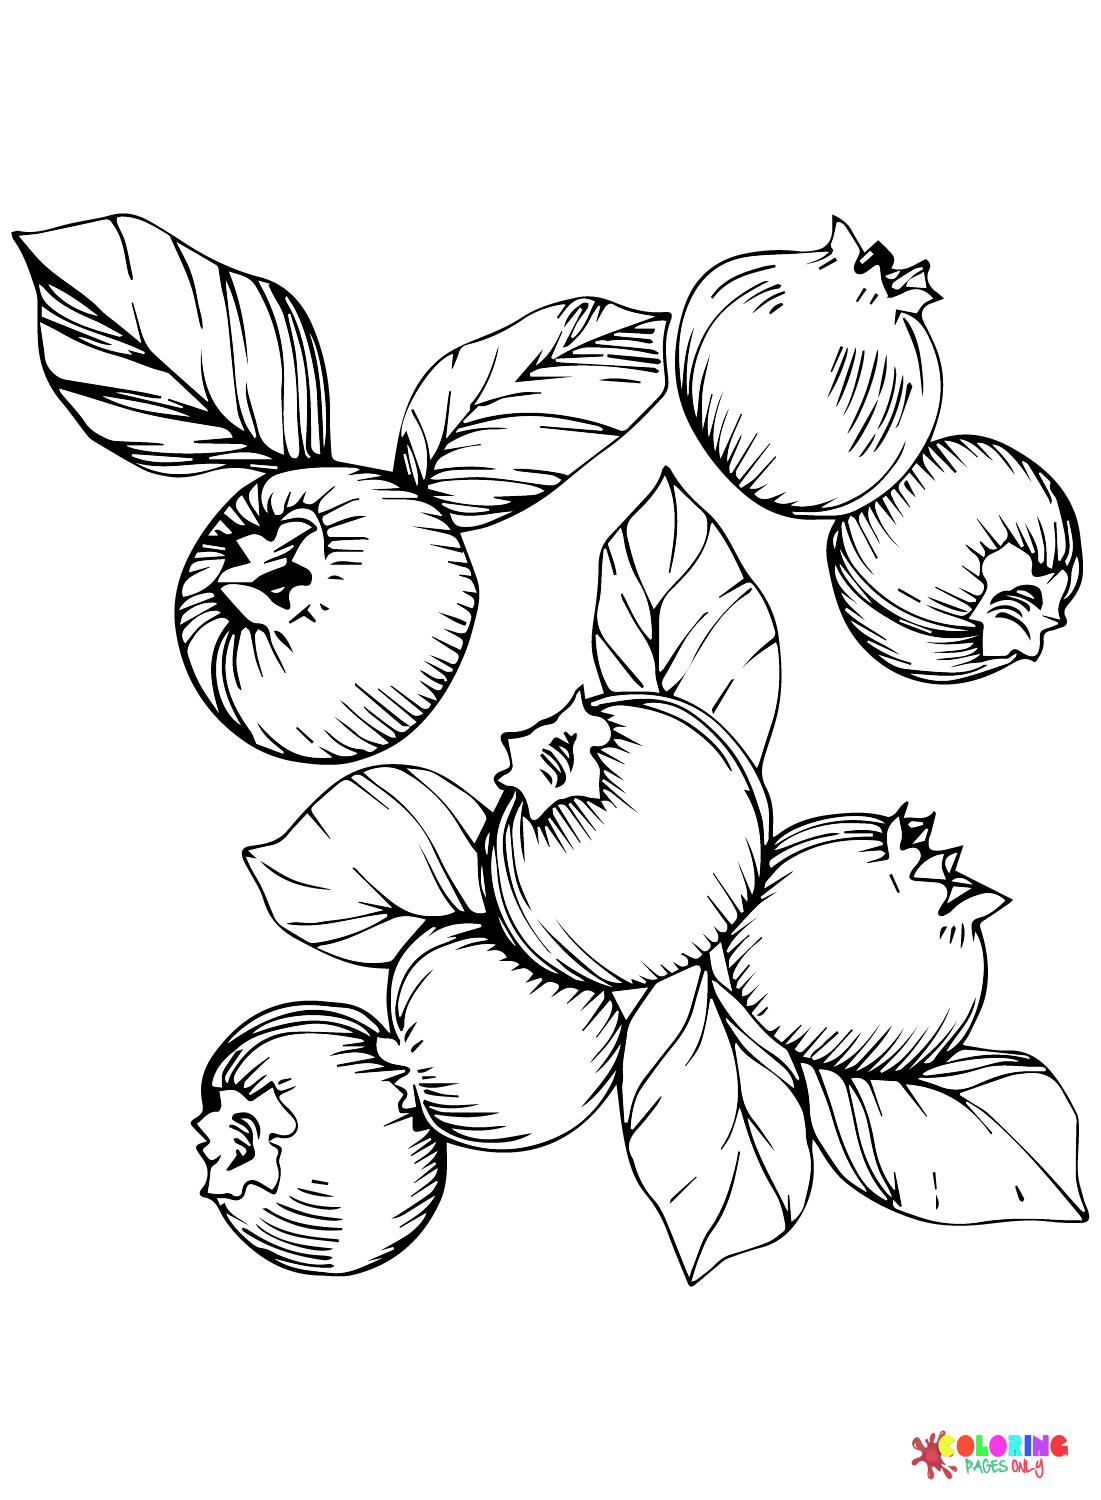 Blueberry Pictures Coloring Page